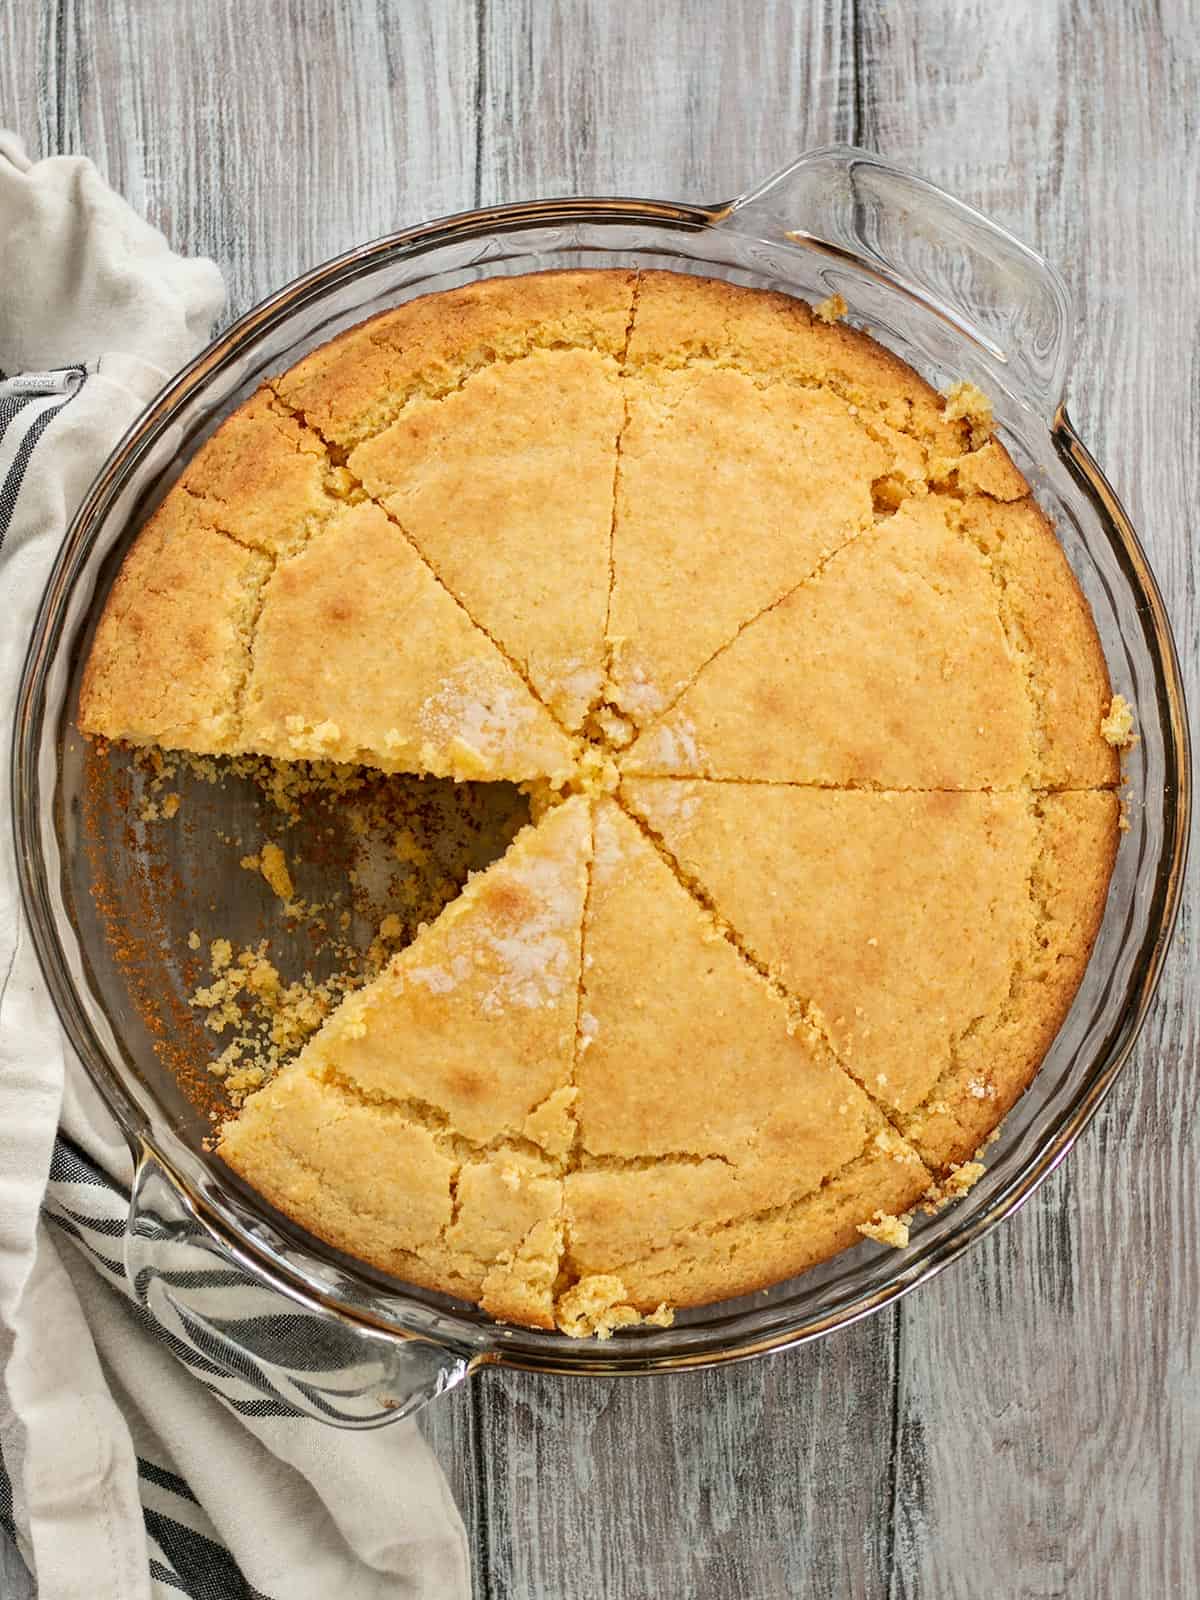 Overhead view of cornbread in a glass baking dish with one piece cut out.